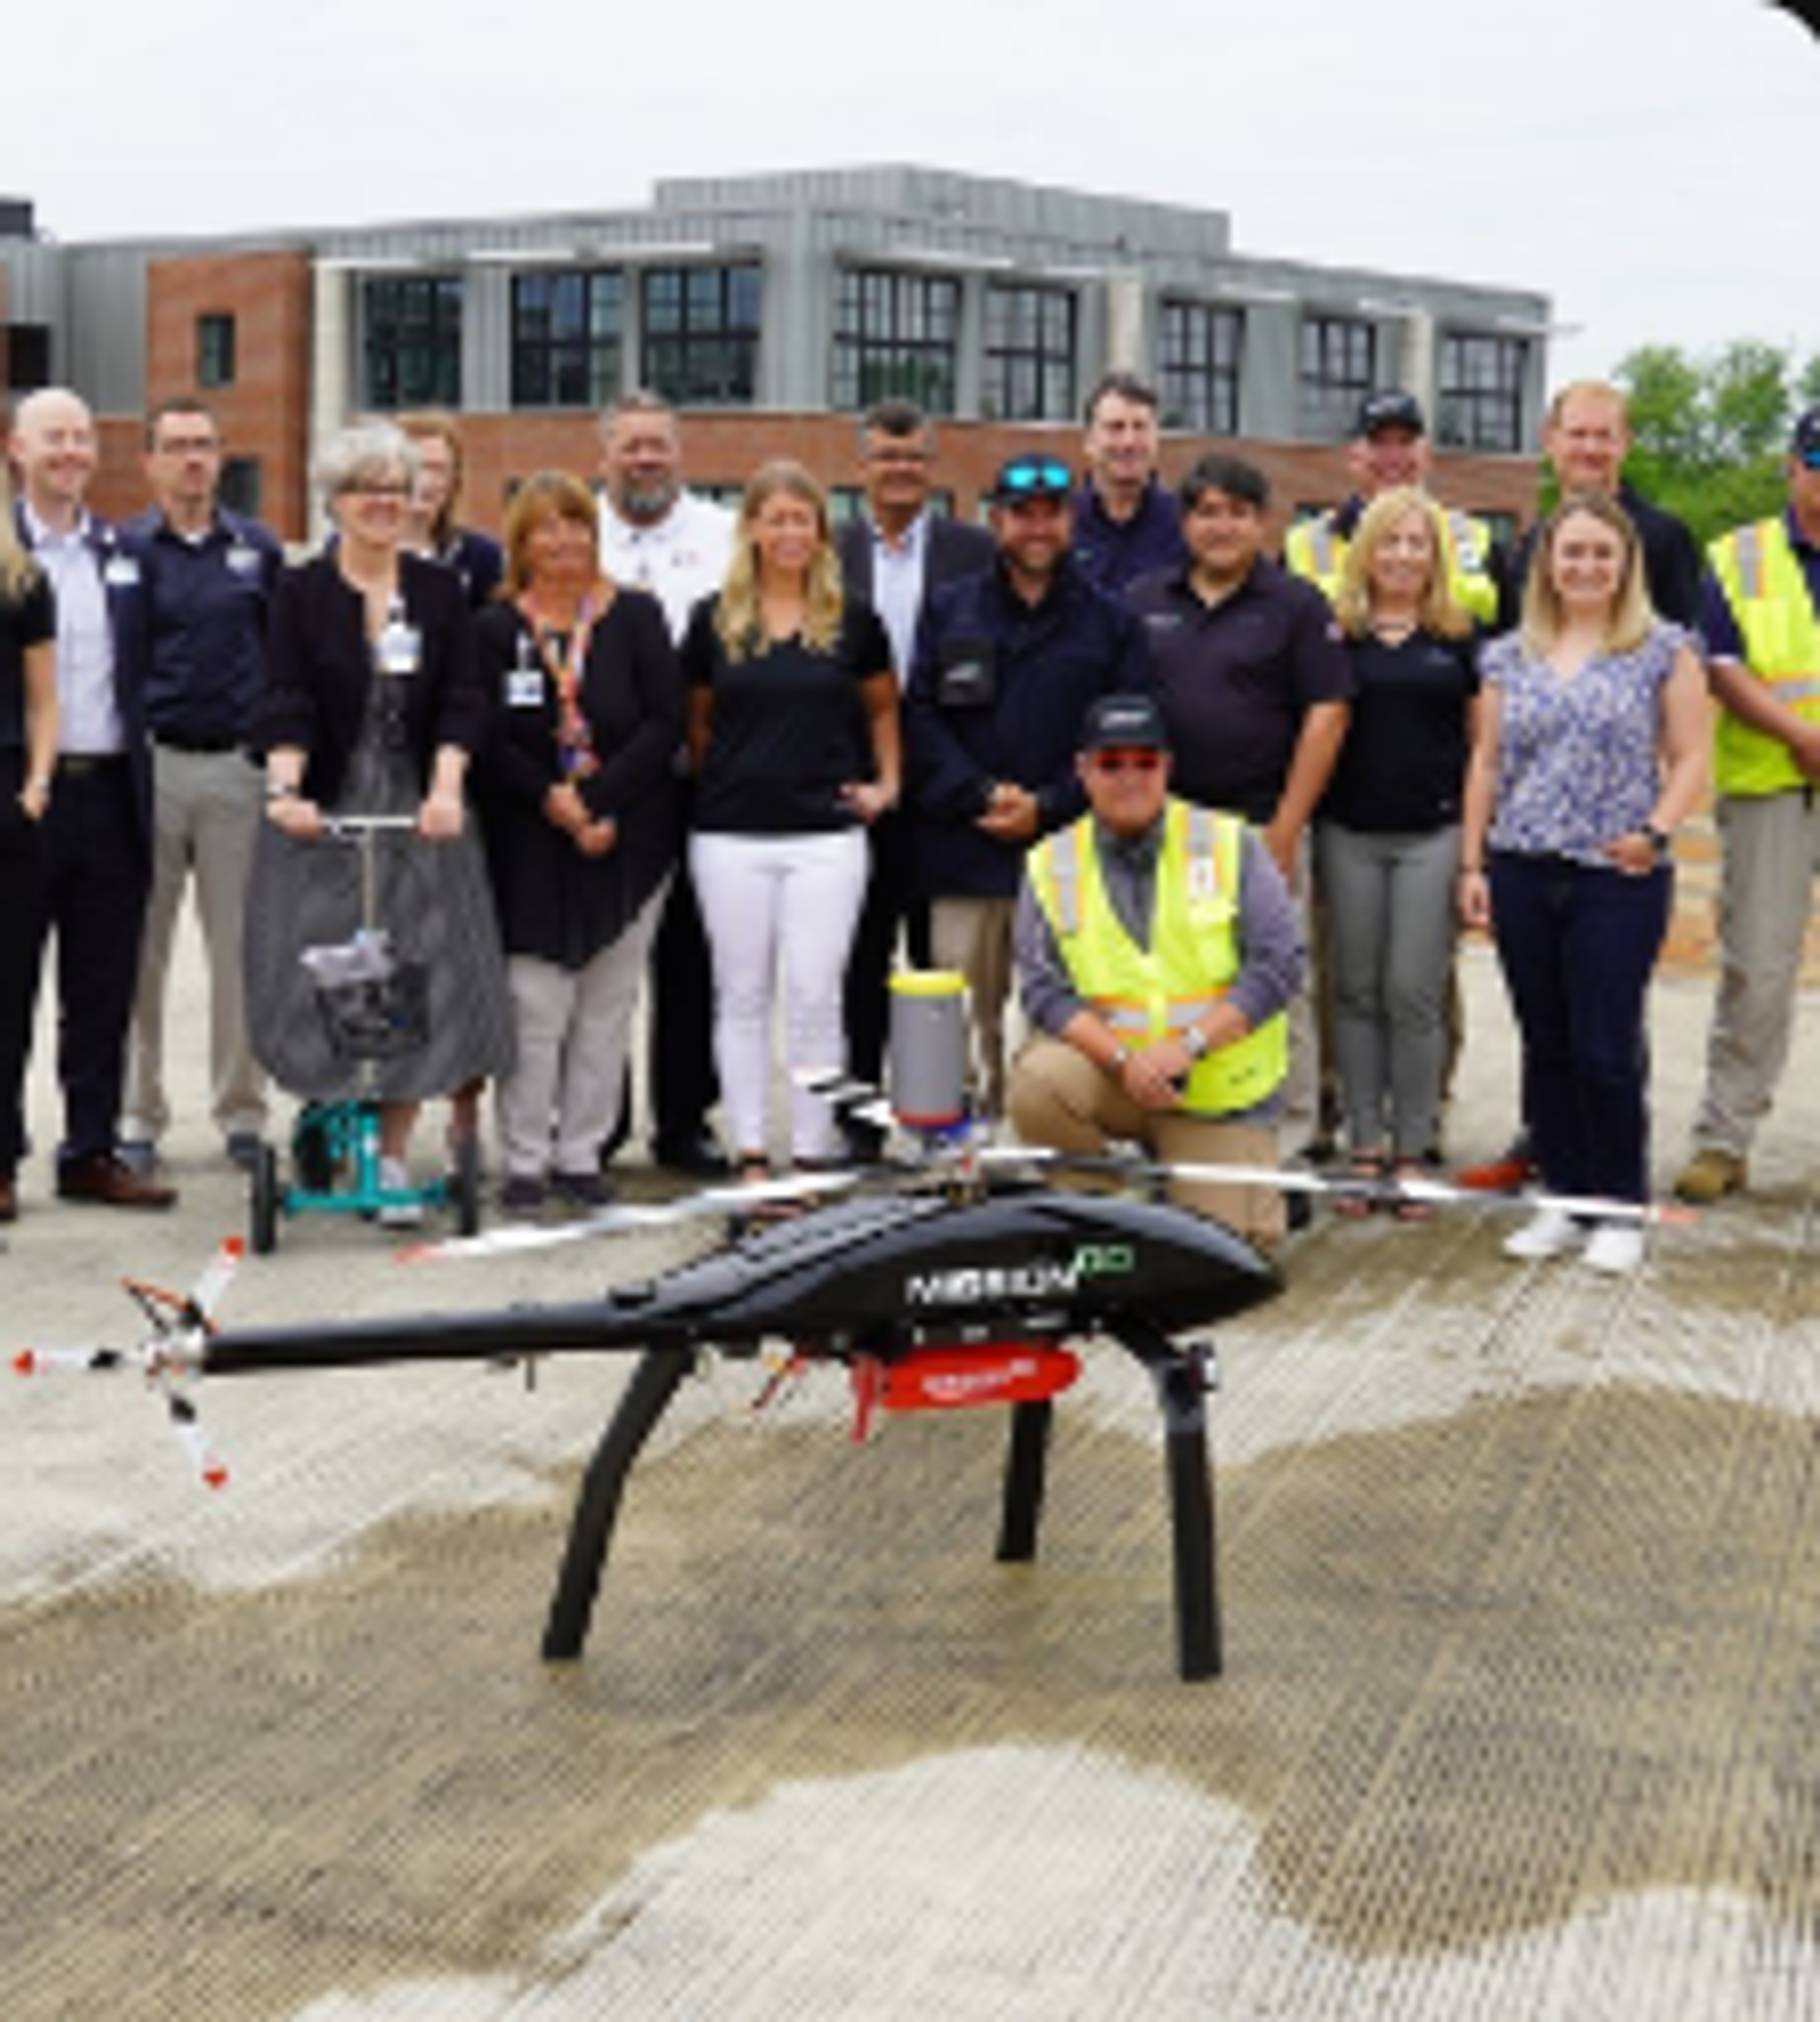 Real-world medical delivery demonstration in Michigan provides template for more flights - Unmanned airspace